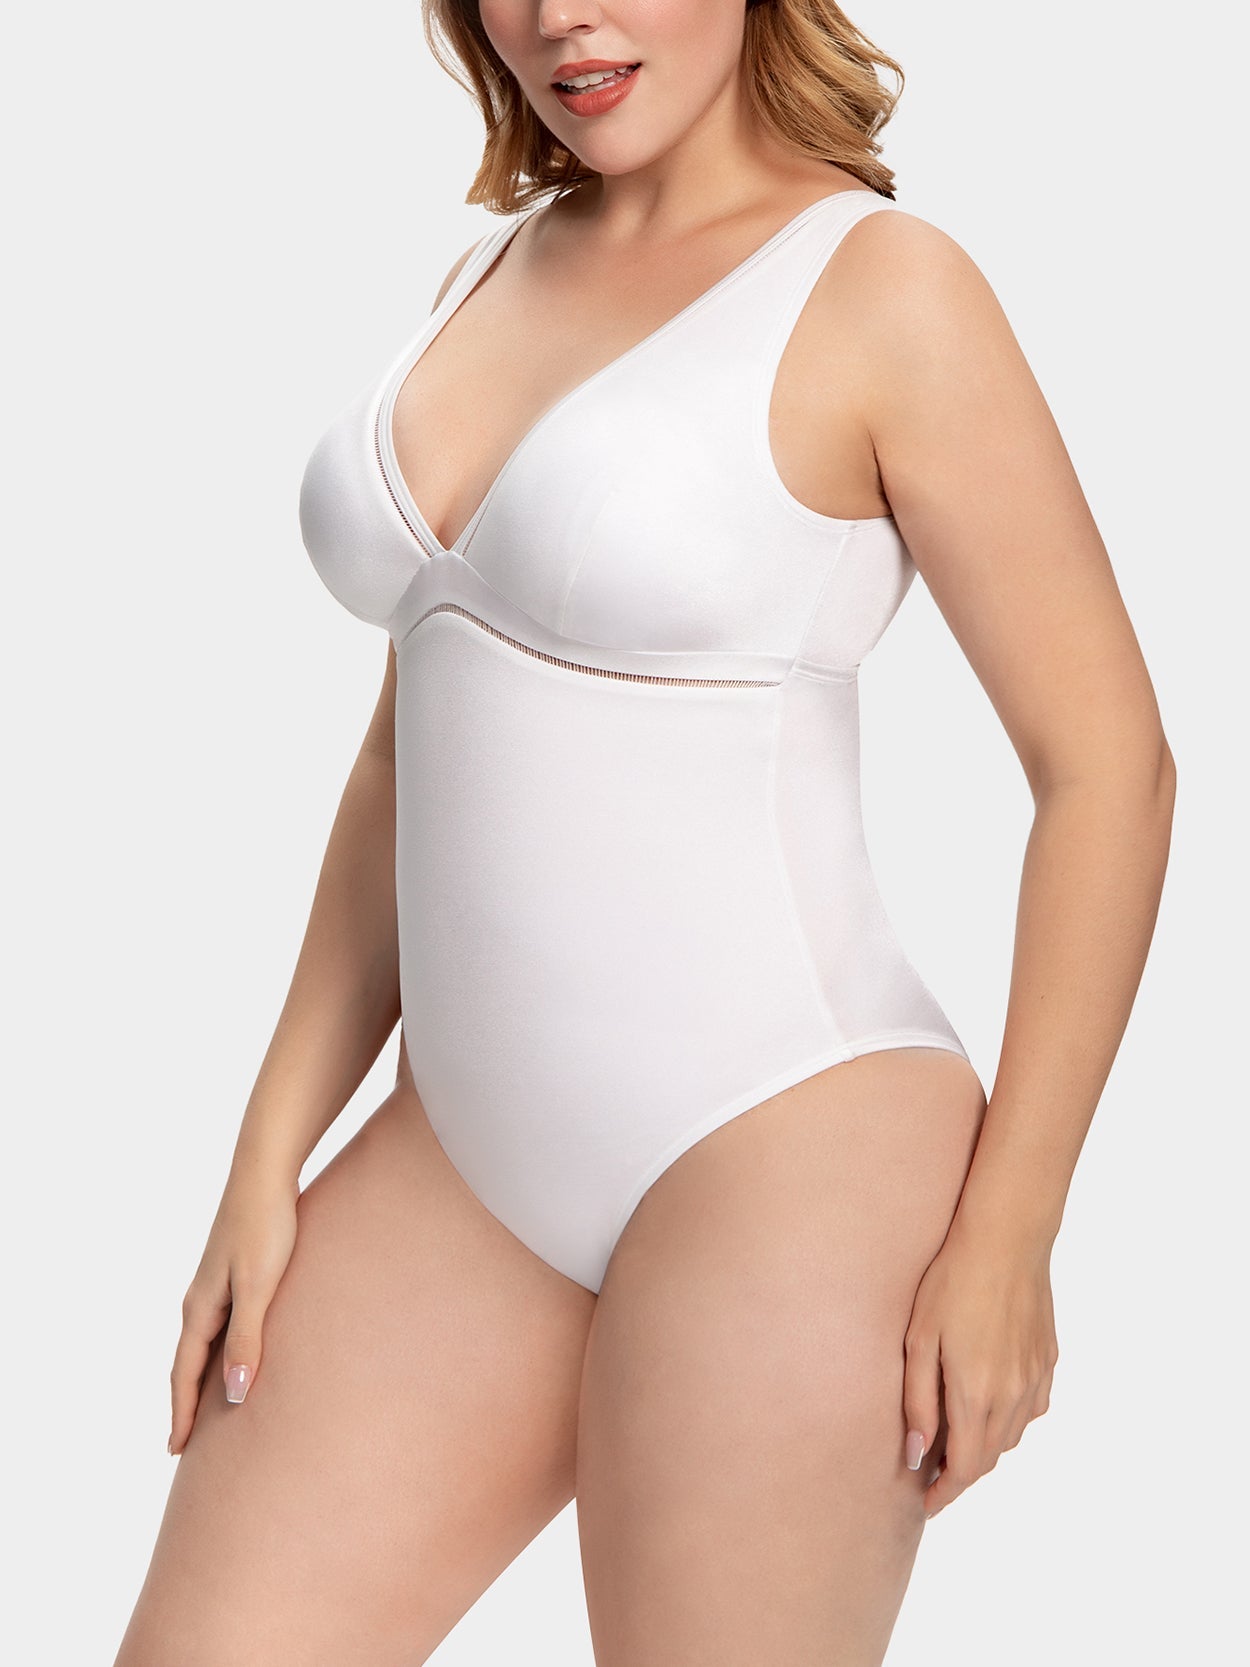 LEEy-world Plus Size Swimsuit for Women Women Lace up One Piece Swimsuit  Deep Plunge V Neck Bathing Suits White,XL